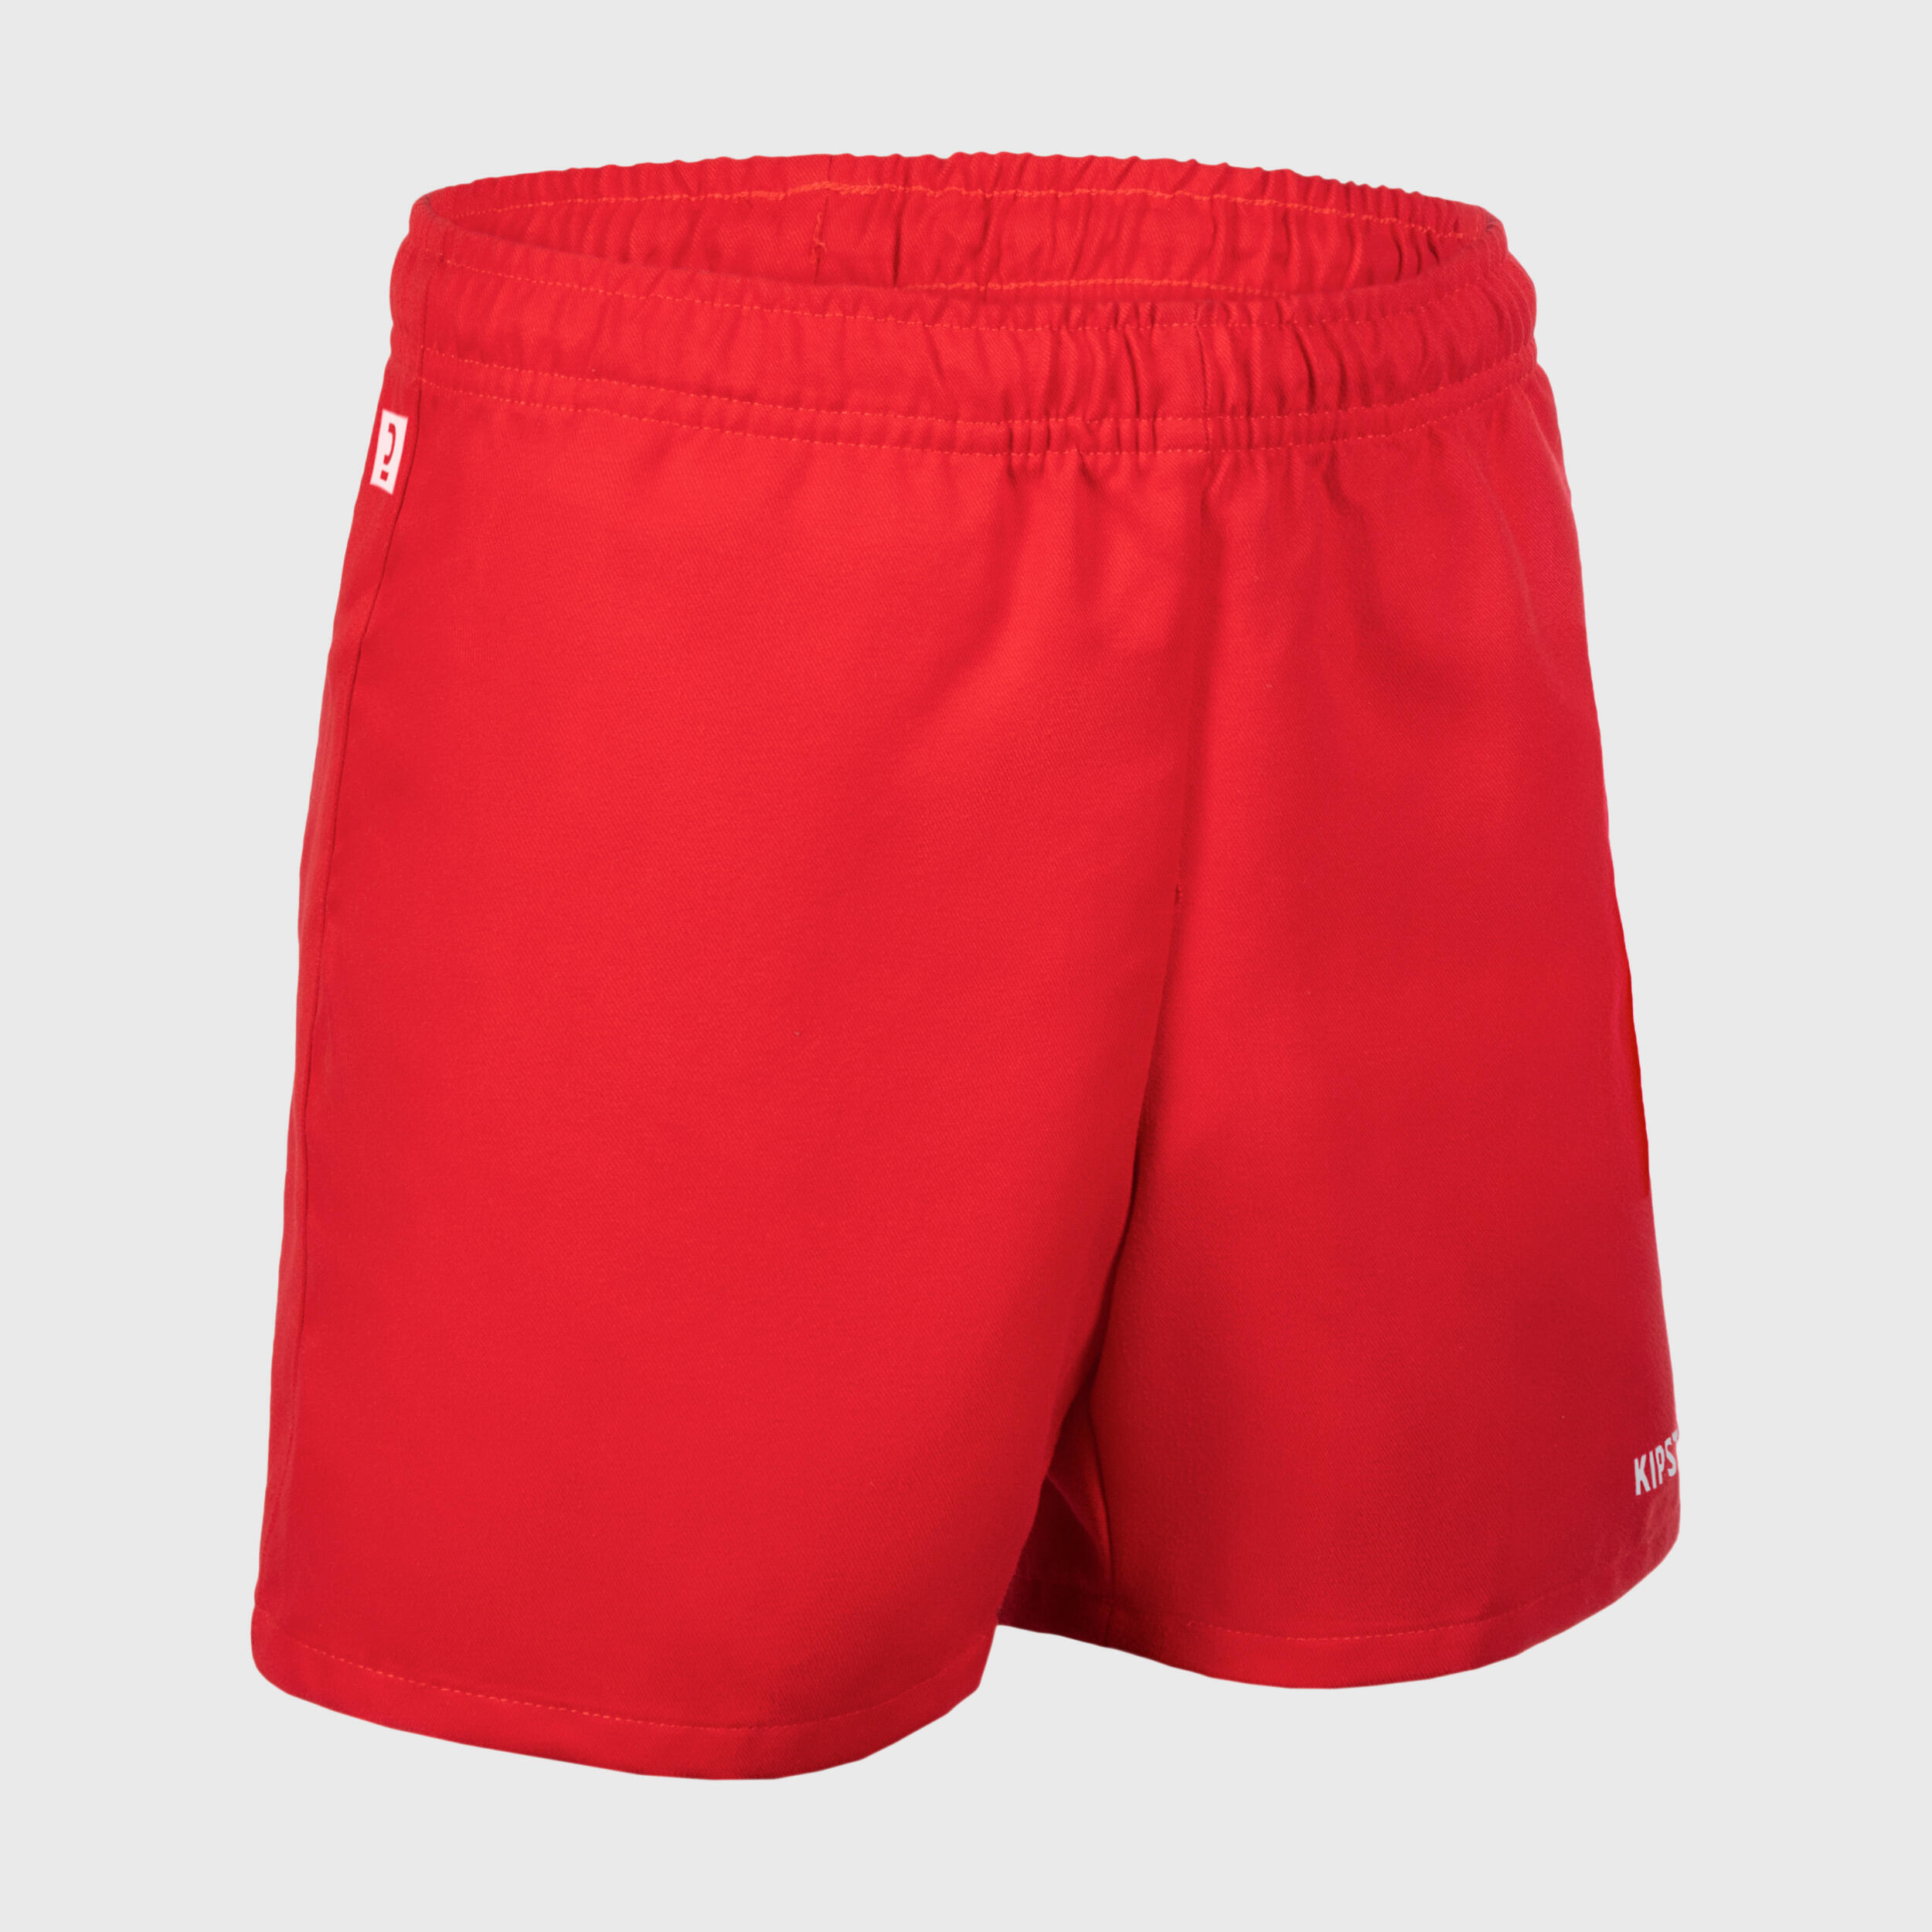 Adult Rugby Shorts with Pockets R100 - Red 1/6